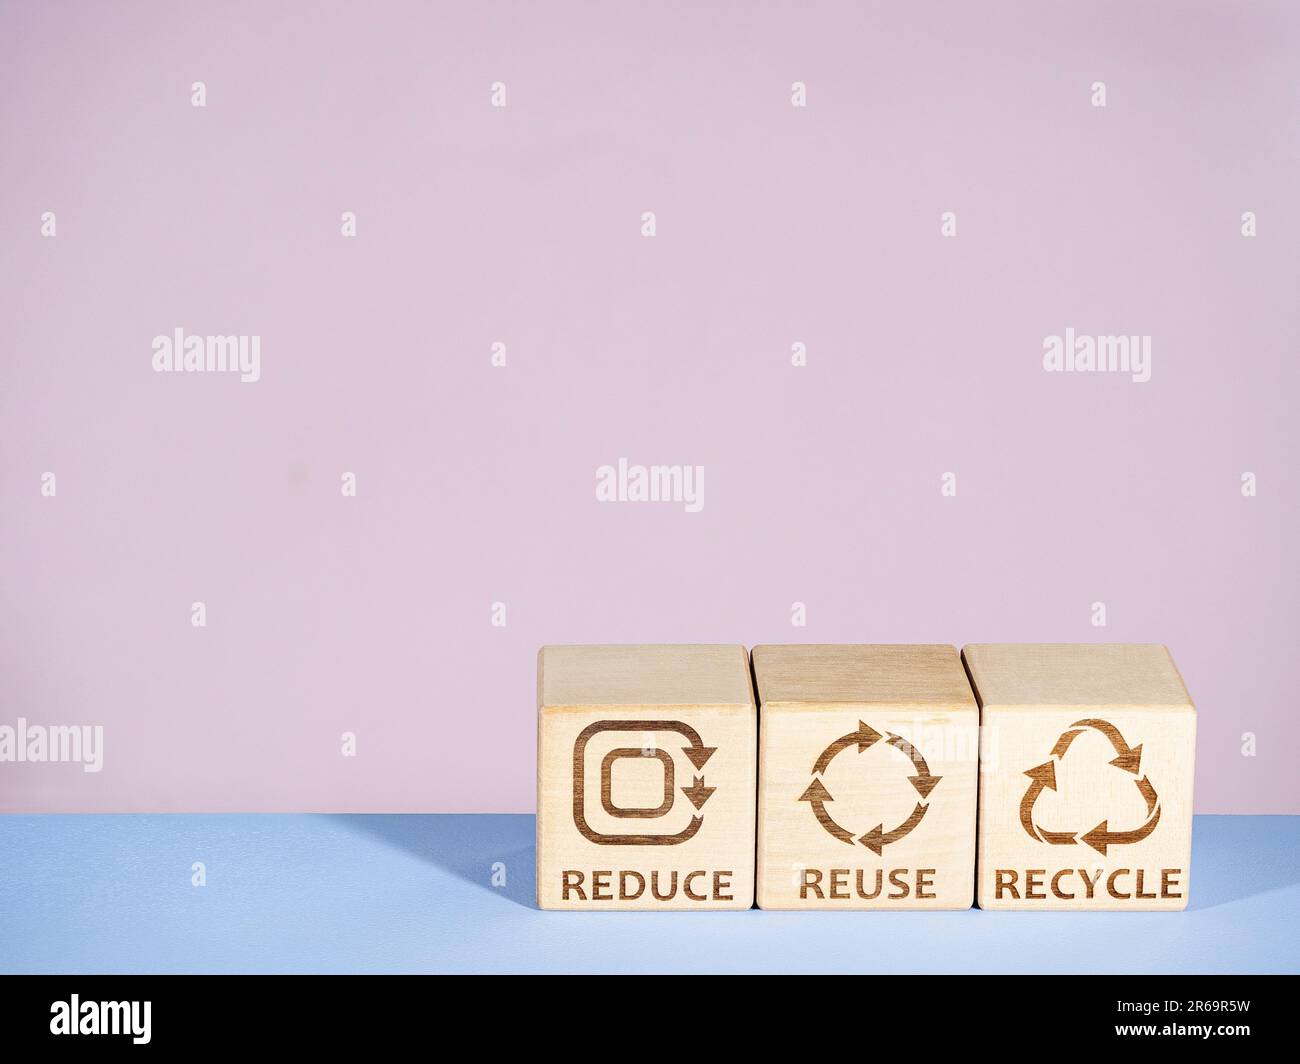 Reduce, Reuse, and Recycle symbols as an environmental conservation business strategy Stock Photo